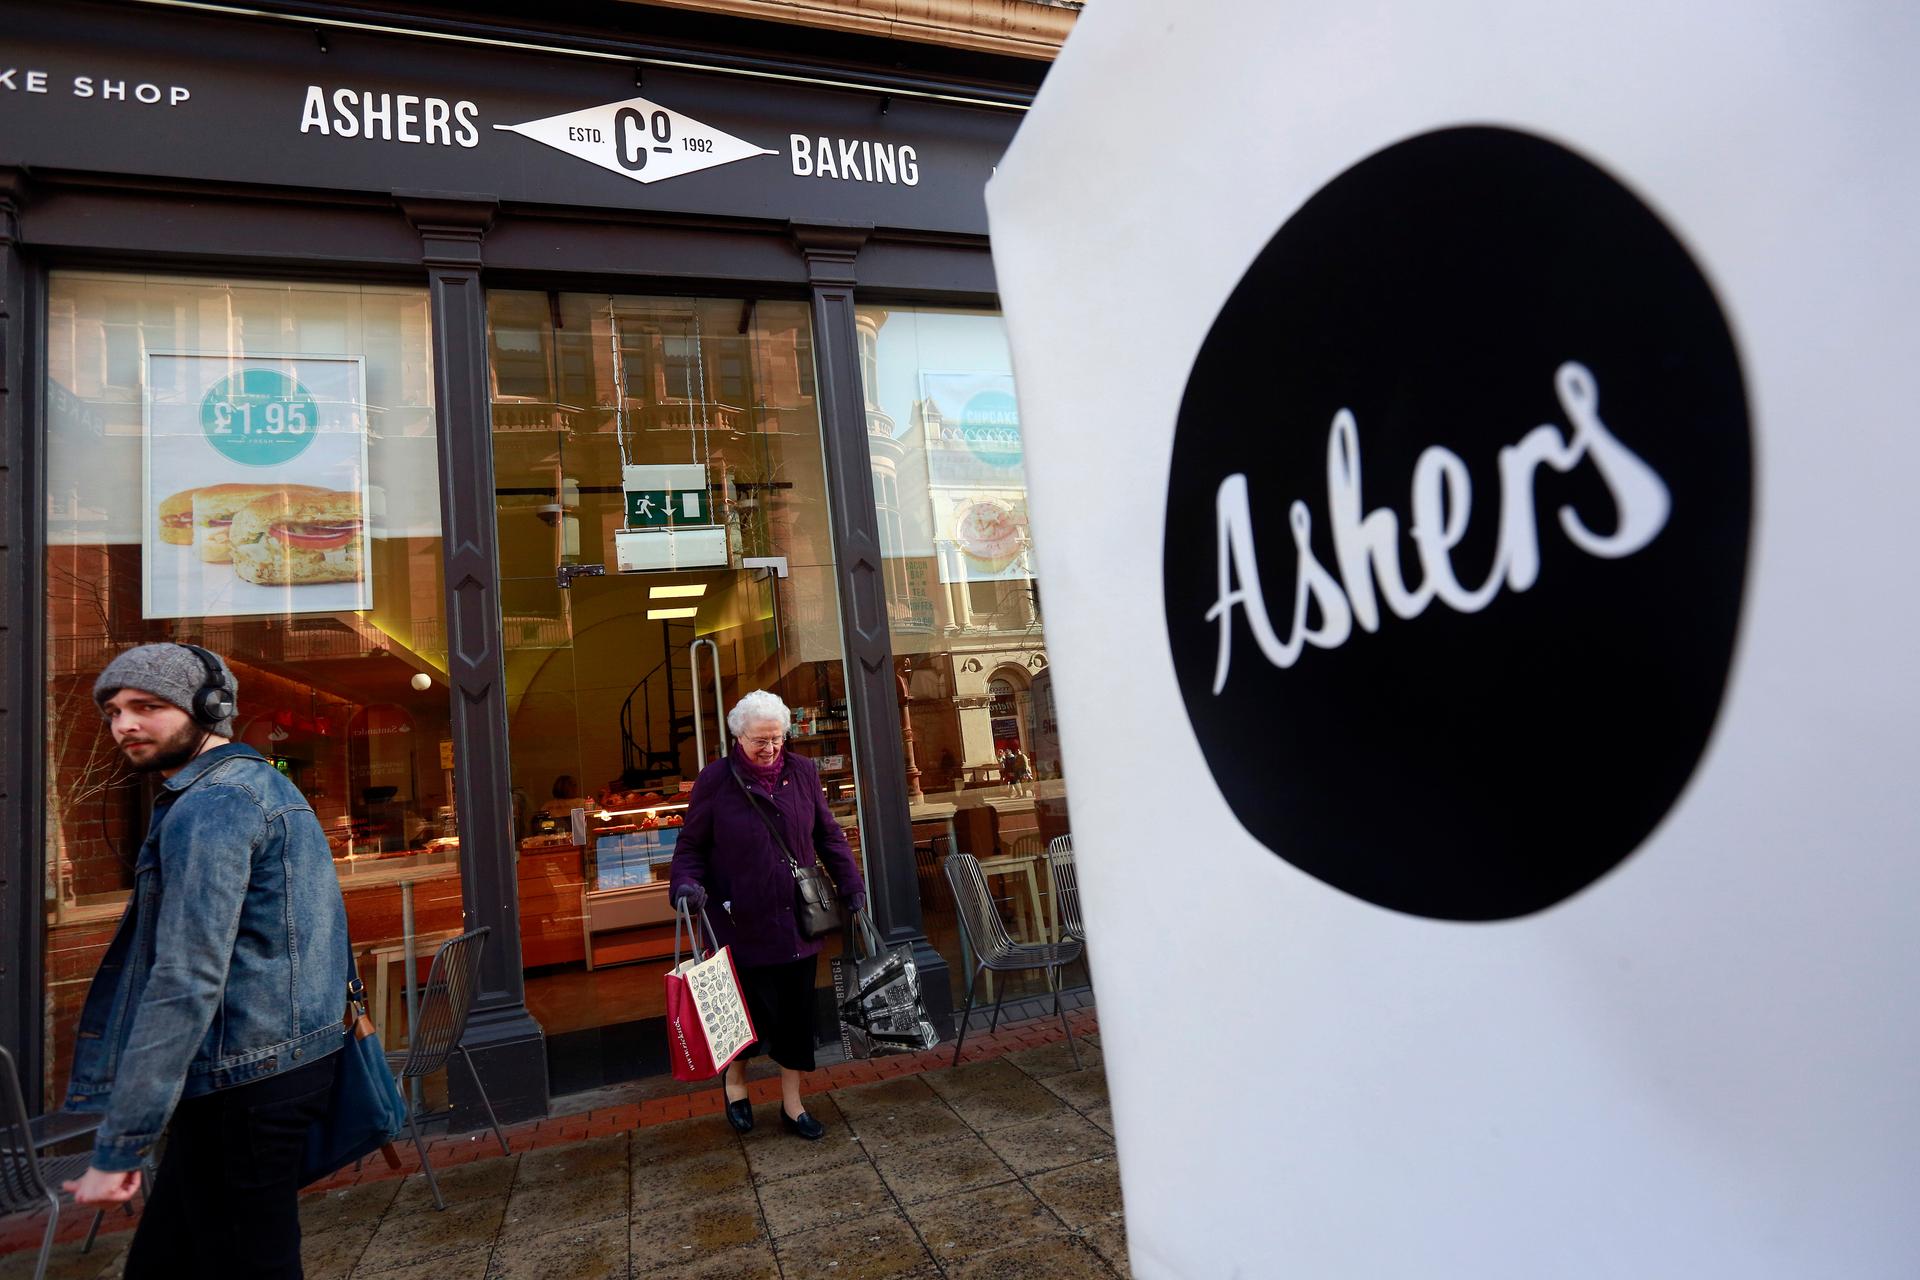 A woman leaves Ashers bakery in Belfast, Nothern Ireland, on March 26, 2015. Ashers will face a discrimination case from the Equality Commission after it refused to make a cake bearing a pro-gay marriage slogan.